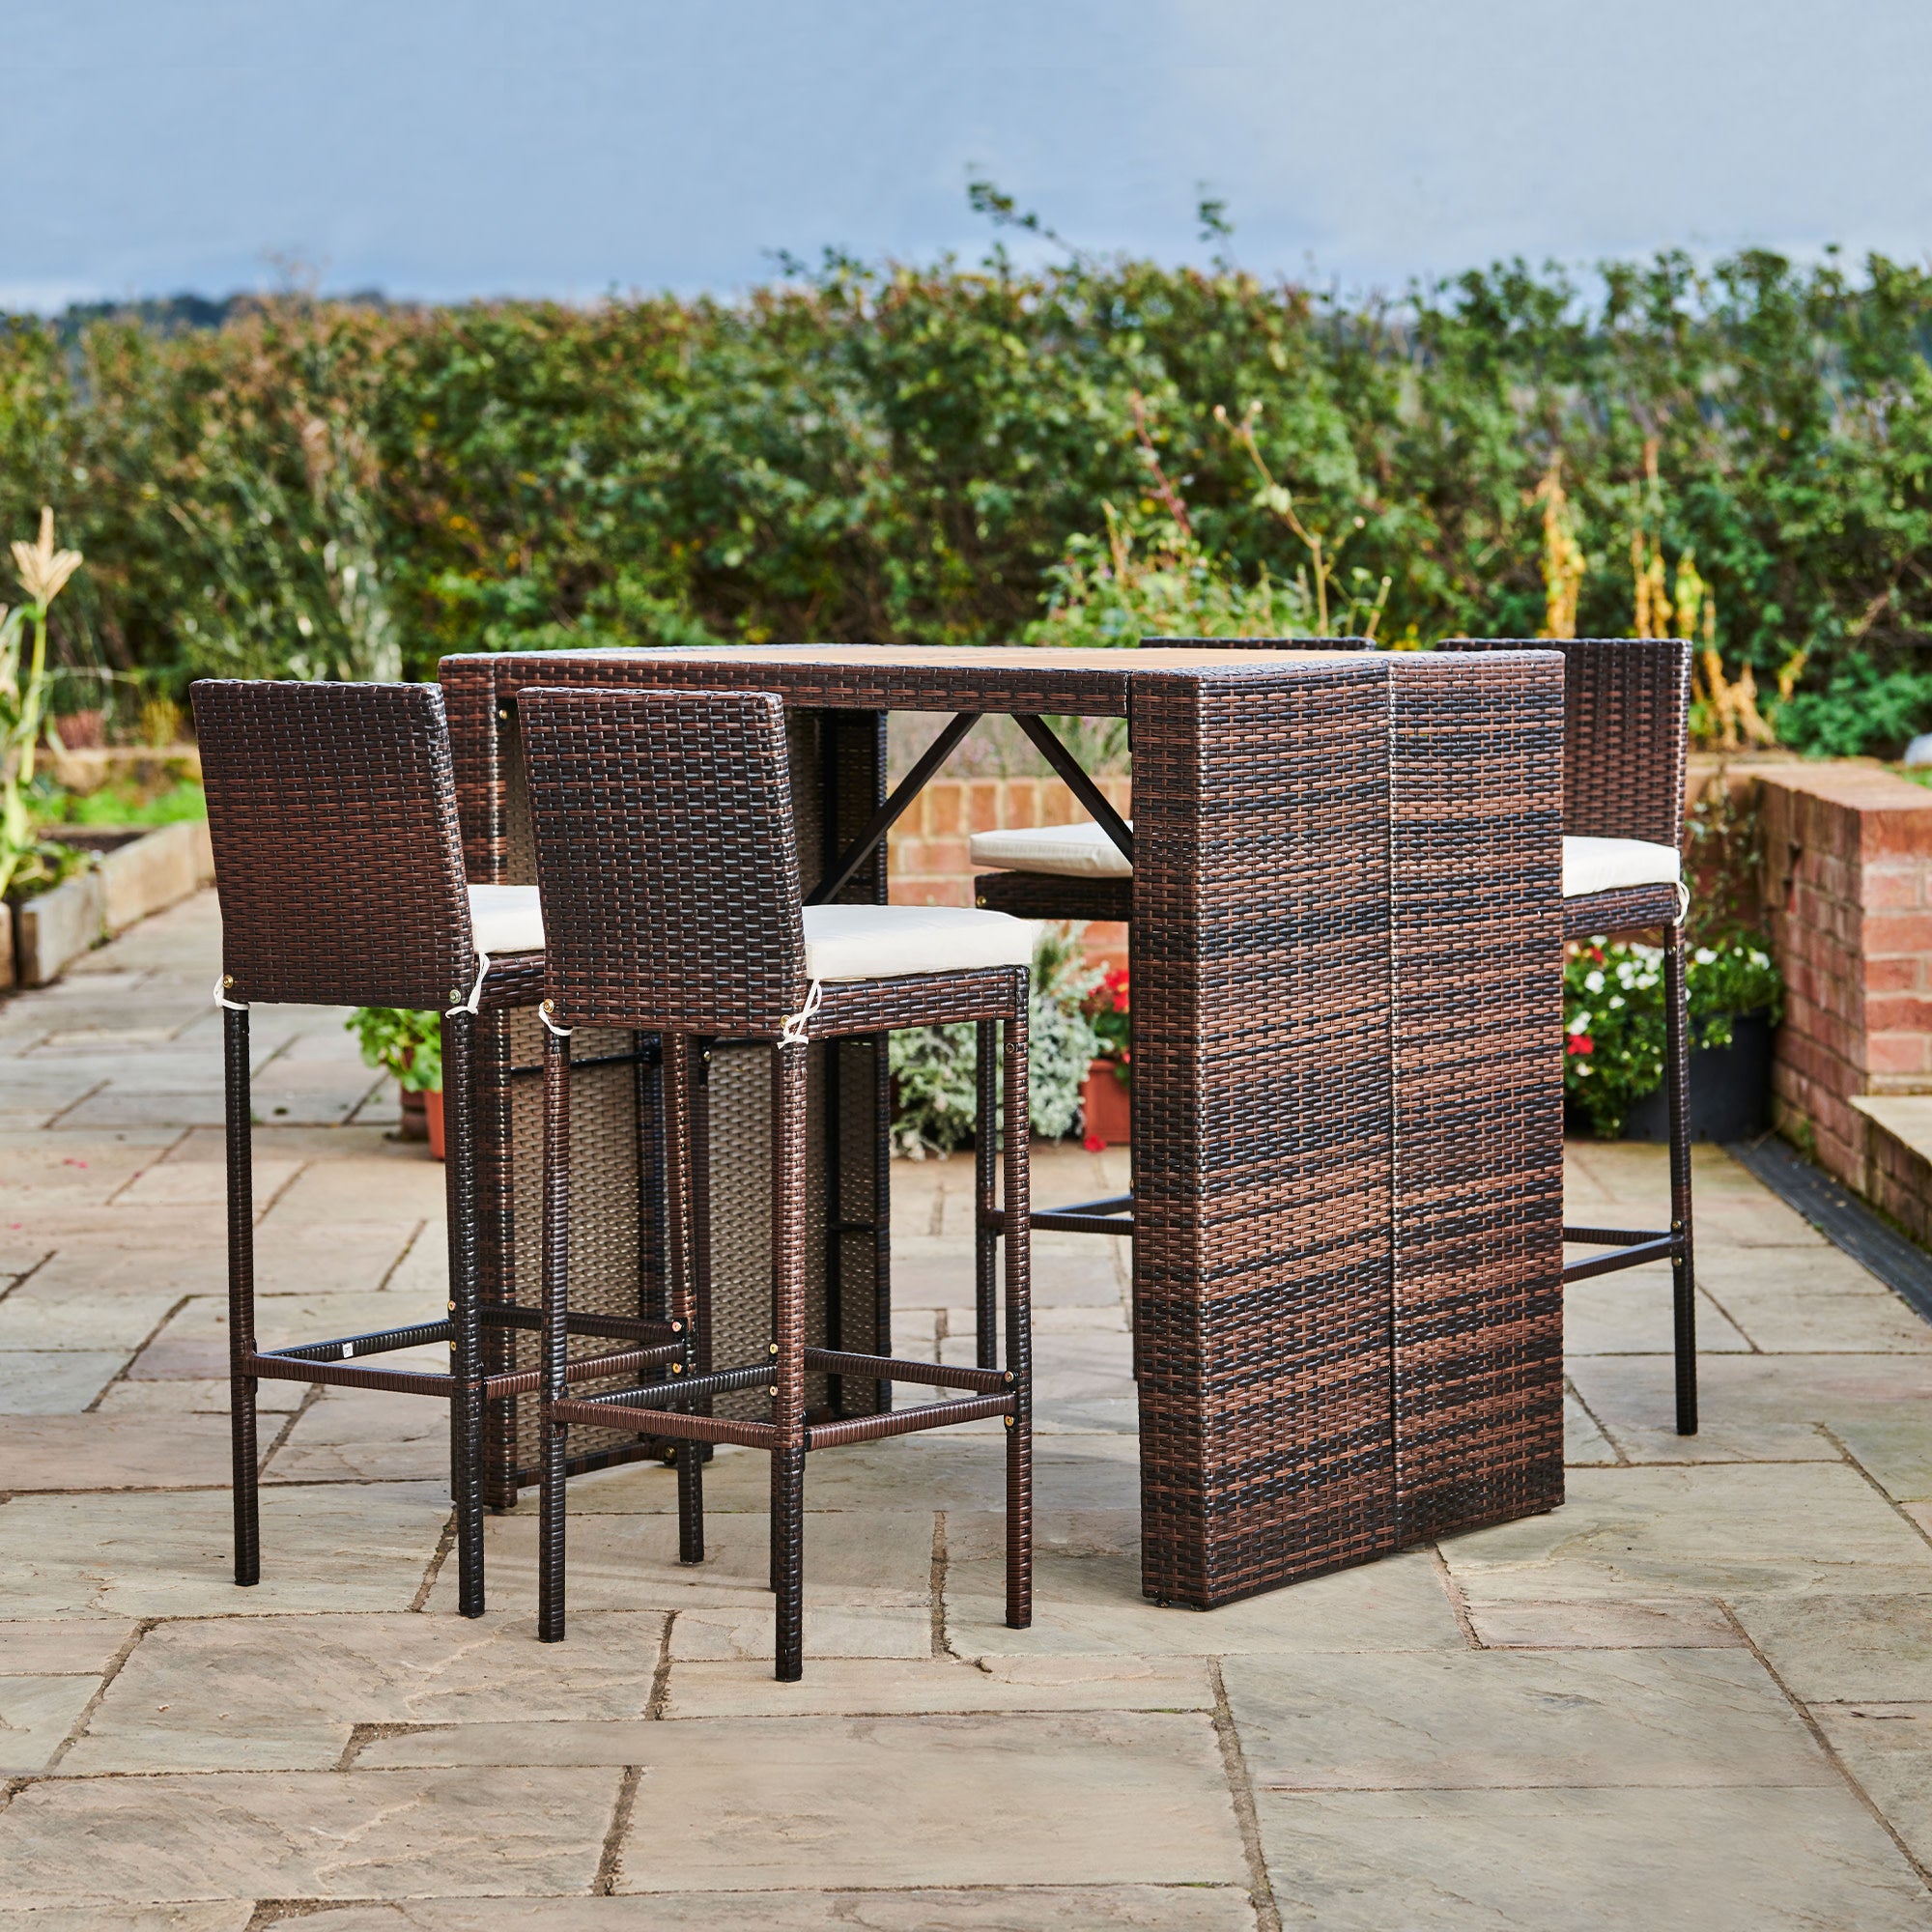 Teamson Home 5 Pc Outdoor Wicker Dining Set with Acacia Tabletop and Cushions, Brown